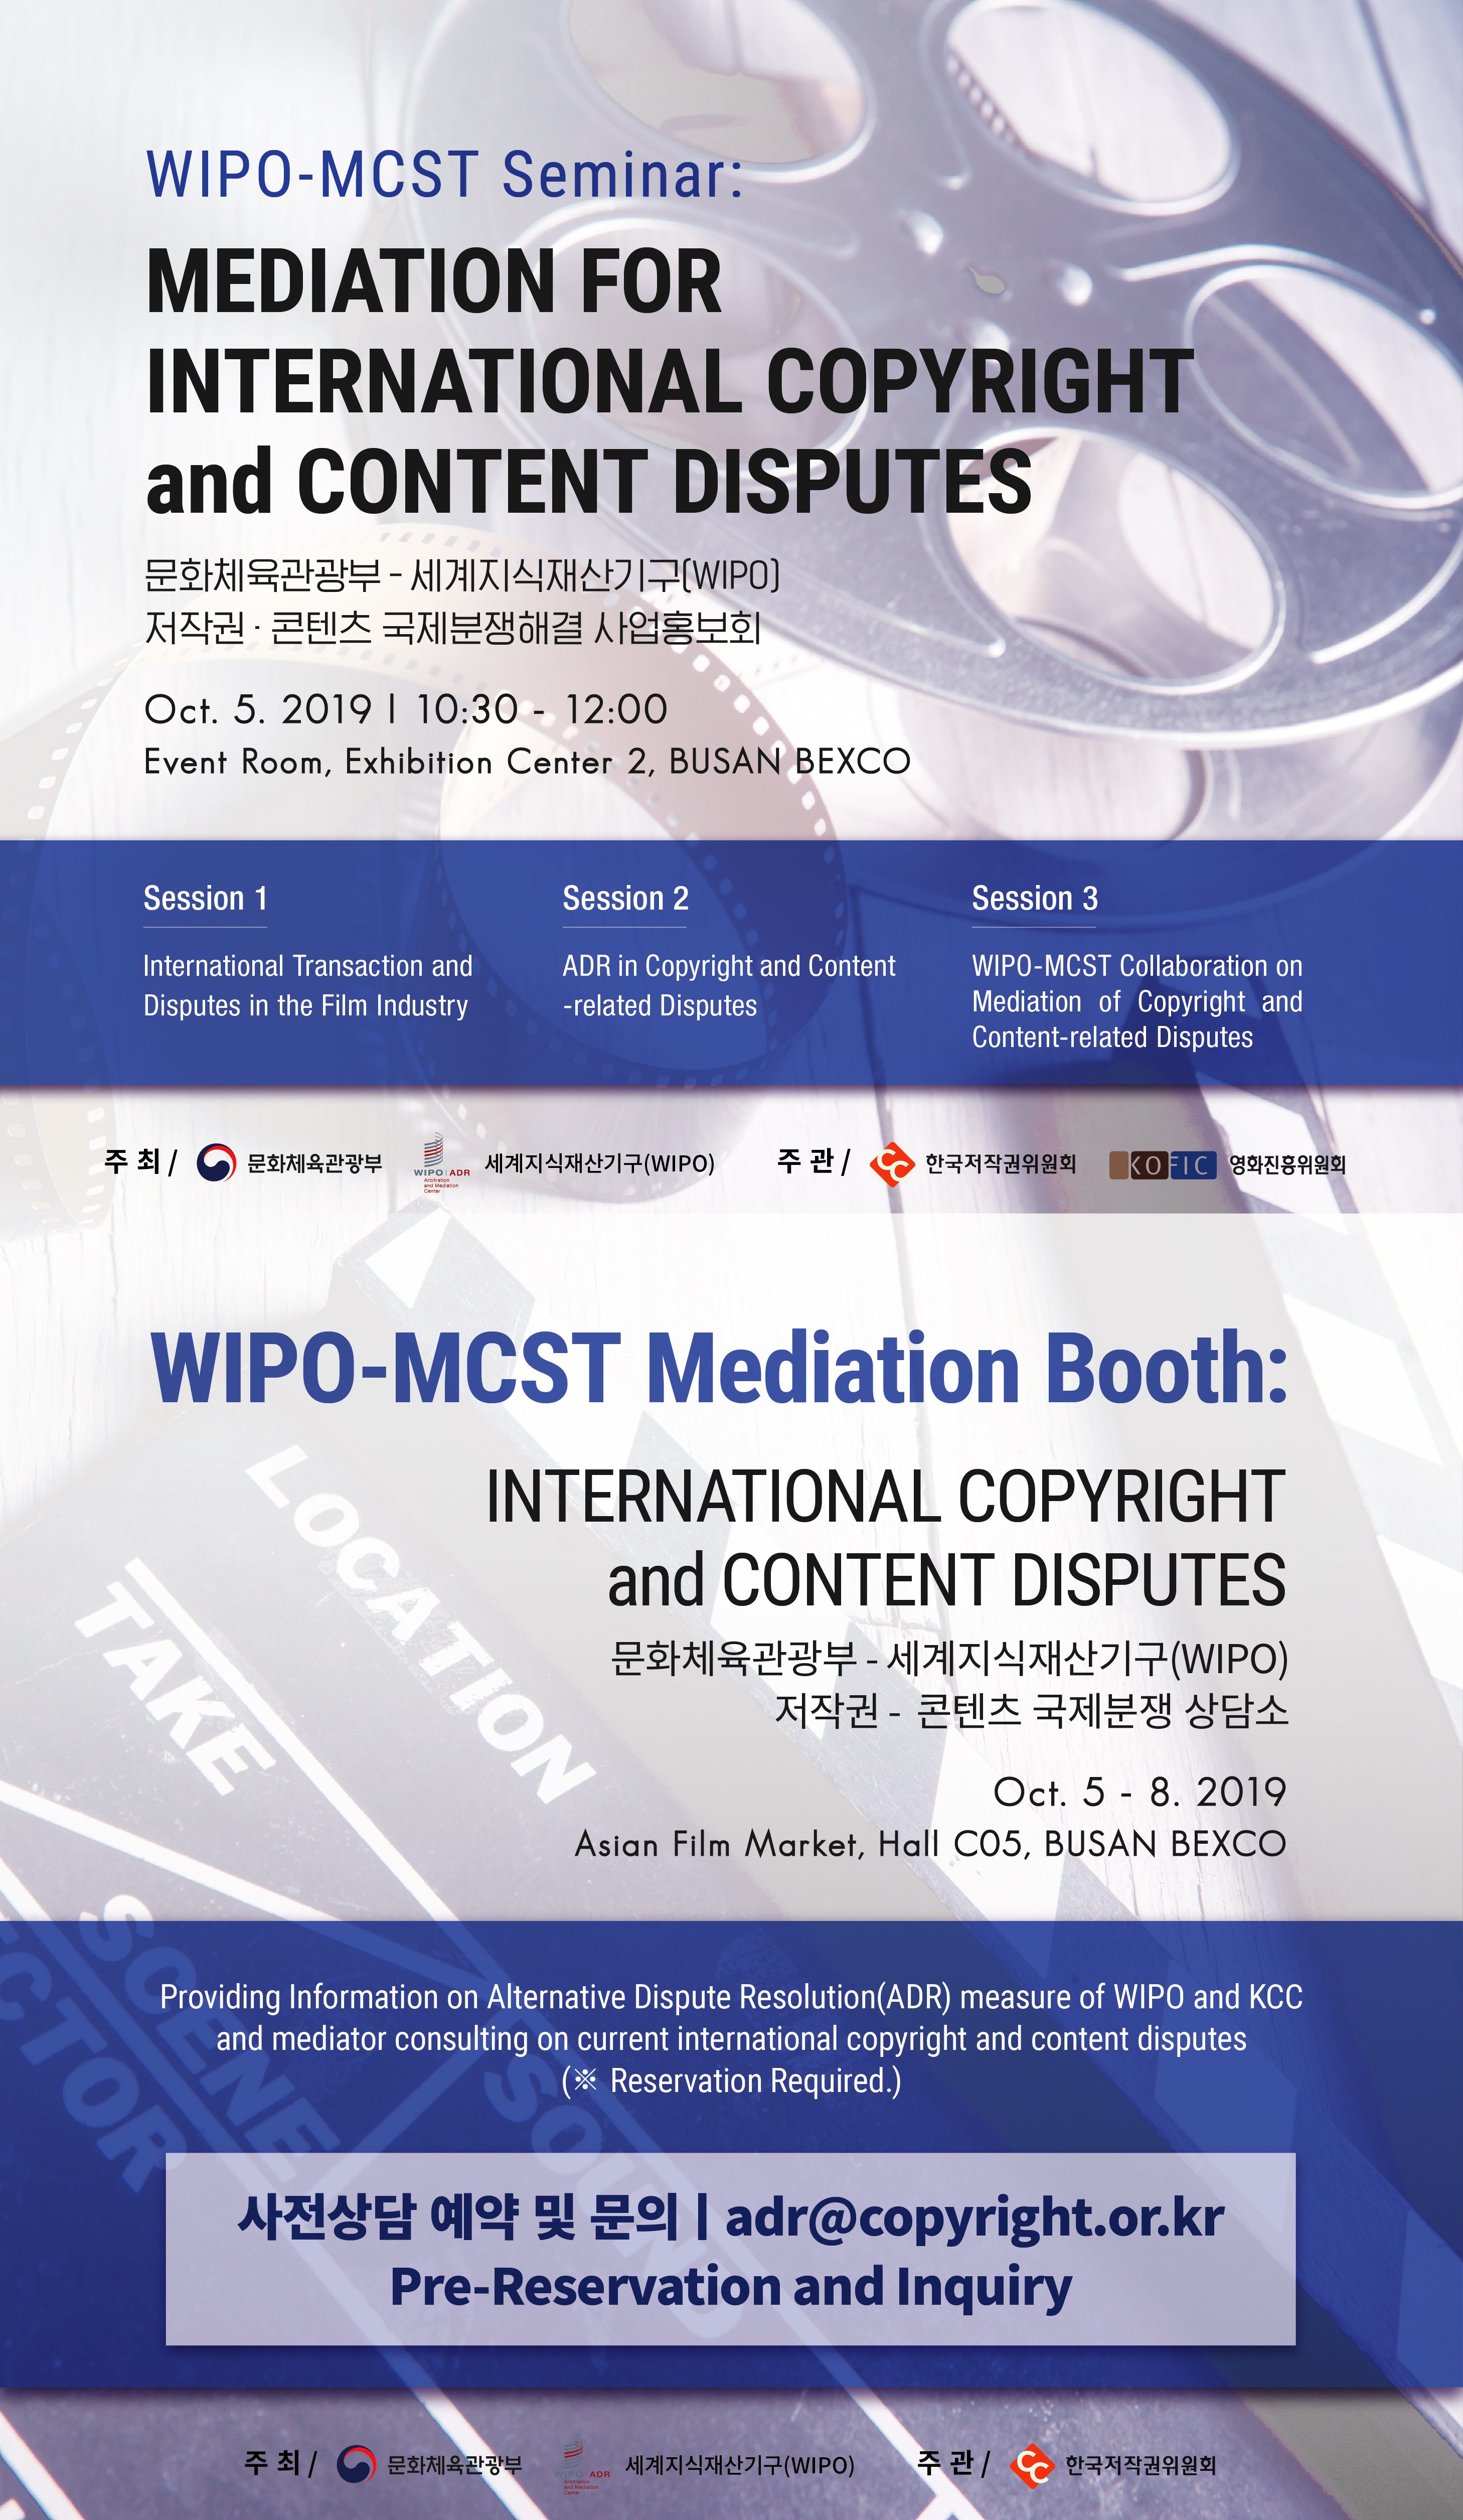 WIPO-MCST Seminar: MEDIATION FOR INTERNATIONAL COPYRIGHT and CONTENT DISPUTES 문화체육관광부-세계지식재산기구(WIPO) 저작권 콘텐츠 국제분쟁해결 사업홍보회 Oct.5.2019 10:30-12:00 Event Room, Exhibition Center 2, BUSAN BEXCO. SESSION1,International Transaction and Disputes in the Film Industry. SESSION2,ADR in Copyright and Content-related Disputes. SESSION3,WIPO-MCST Collaboration on Mediation of Copyright and Content-related Disputes.
WIPO-MCST Mediation Booth:INTERNATIONAL COPYRIGHT and CONTENT DISPUTES. 문화체육관광부-세계지식재산기구(WIPO) 저작권 -콘텐츠 국제분쟁 상담소 Oct.5-8.2019 Asian Film Market, Hall C05,BUSAN BEXCO. Providing Inforamation on Alternative Dispute Resolution(ADR) measure of WIPO and KCC and mediator consulting on current international copyright and content disputes(*Reservation Required). 사전상담 예약 및 문의 | adr@copyright.or.kr Pre-Reservation and Inquiry.